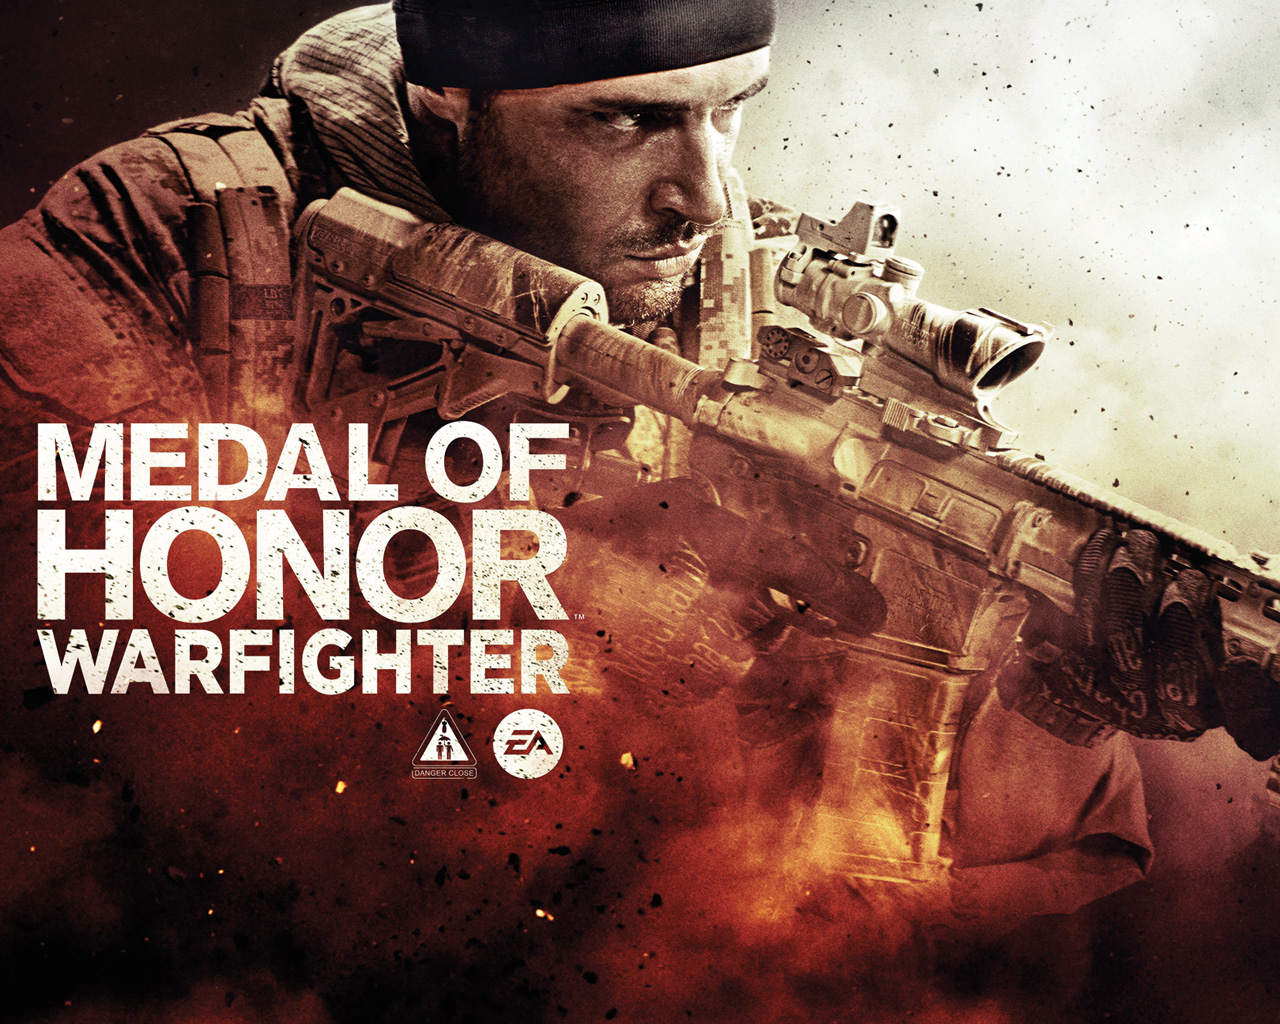 Is Medal of Honor Warfighter based on a true story?